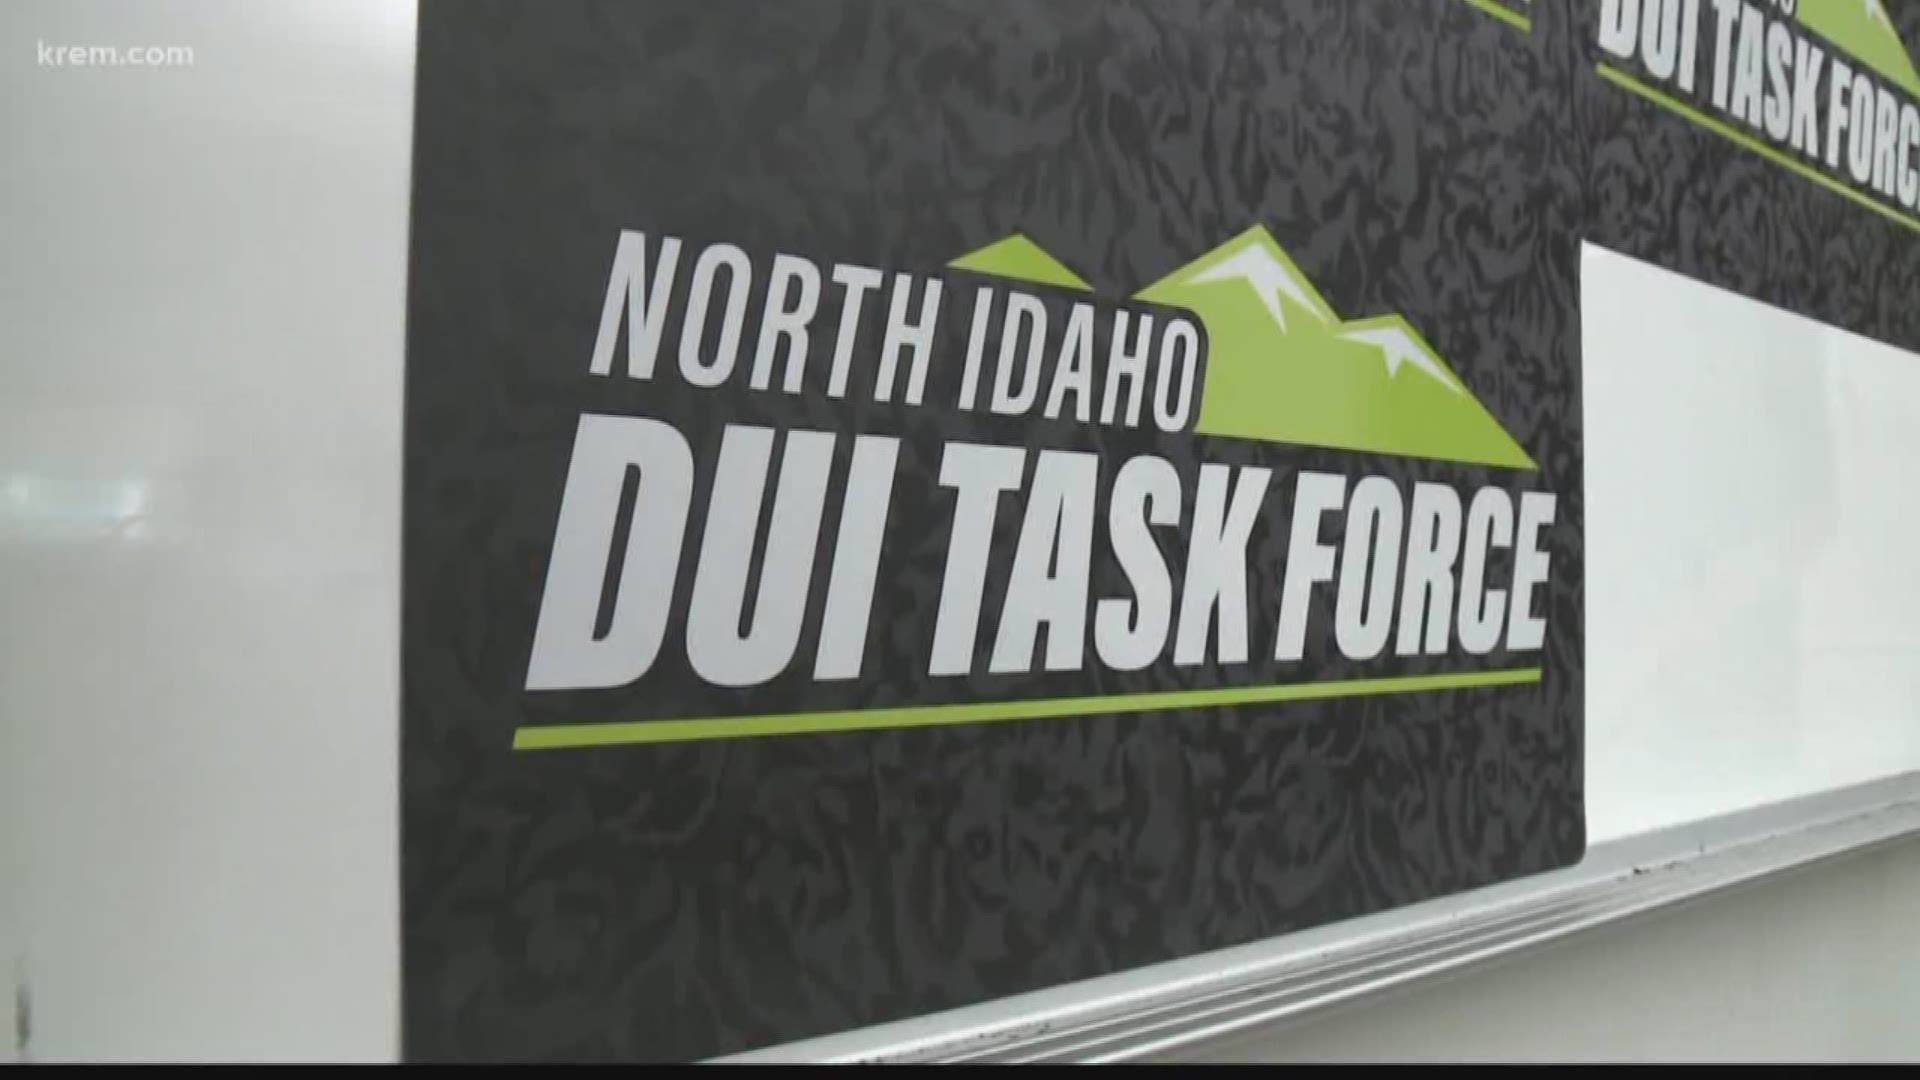 KREM Reporter Taylor Viydo spoke with officials about the new North Idaho DUI Task Force and their emphasis patrols aimed at ending DUI crashes and deaths.